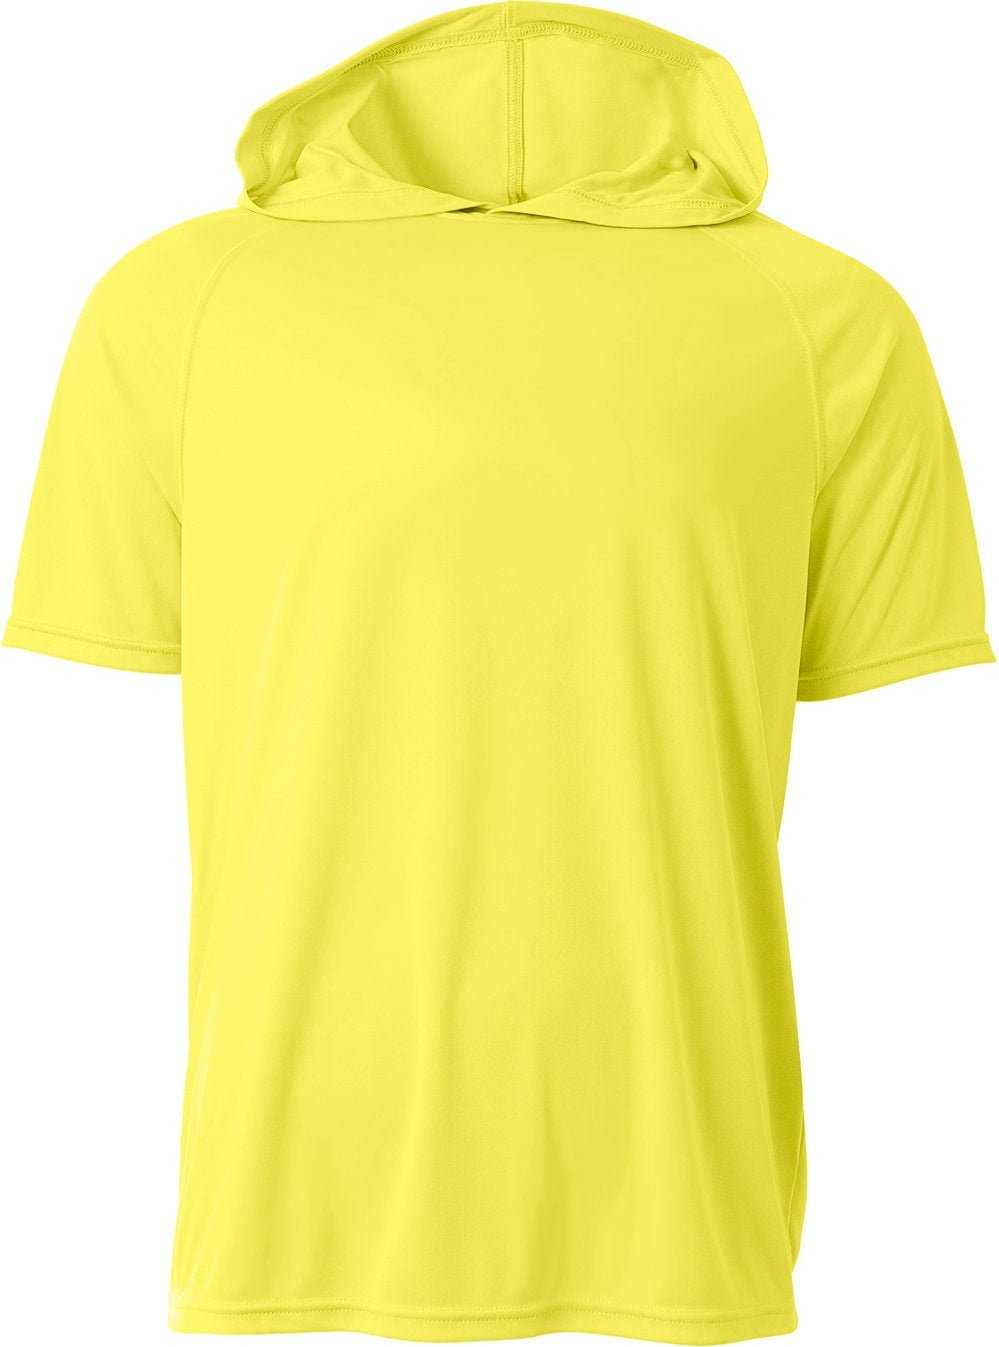 A4 N3408 Men'S Cooling Performance Hooded T-Shirt - SAFETY YELLOW - HIT a Double - 2